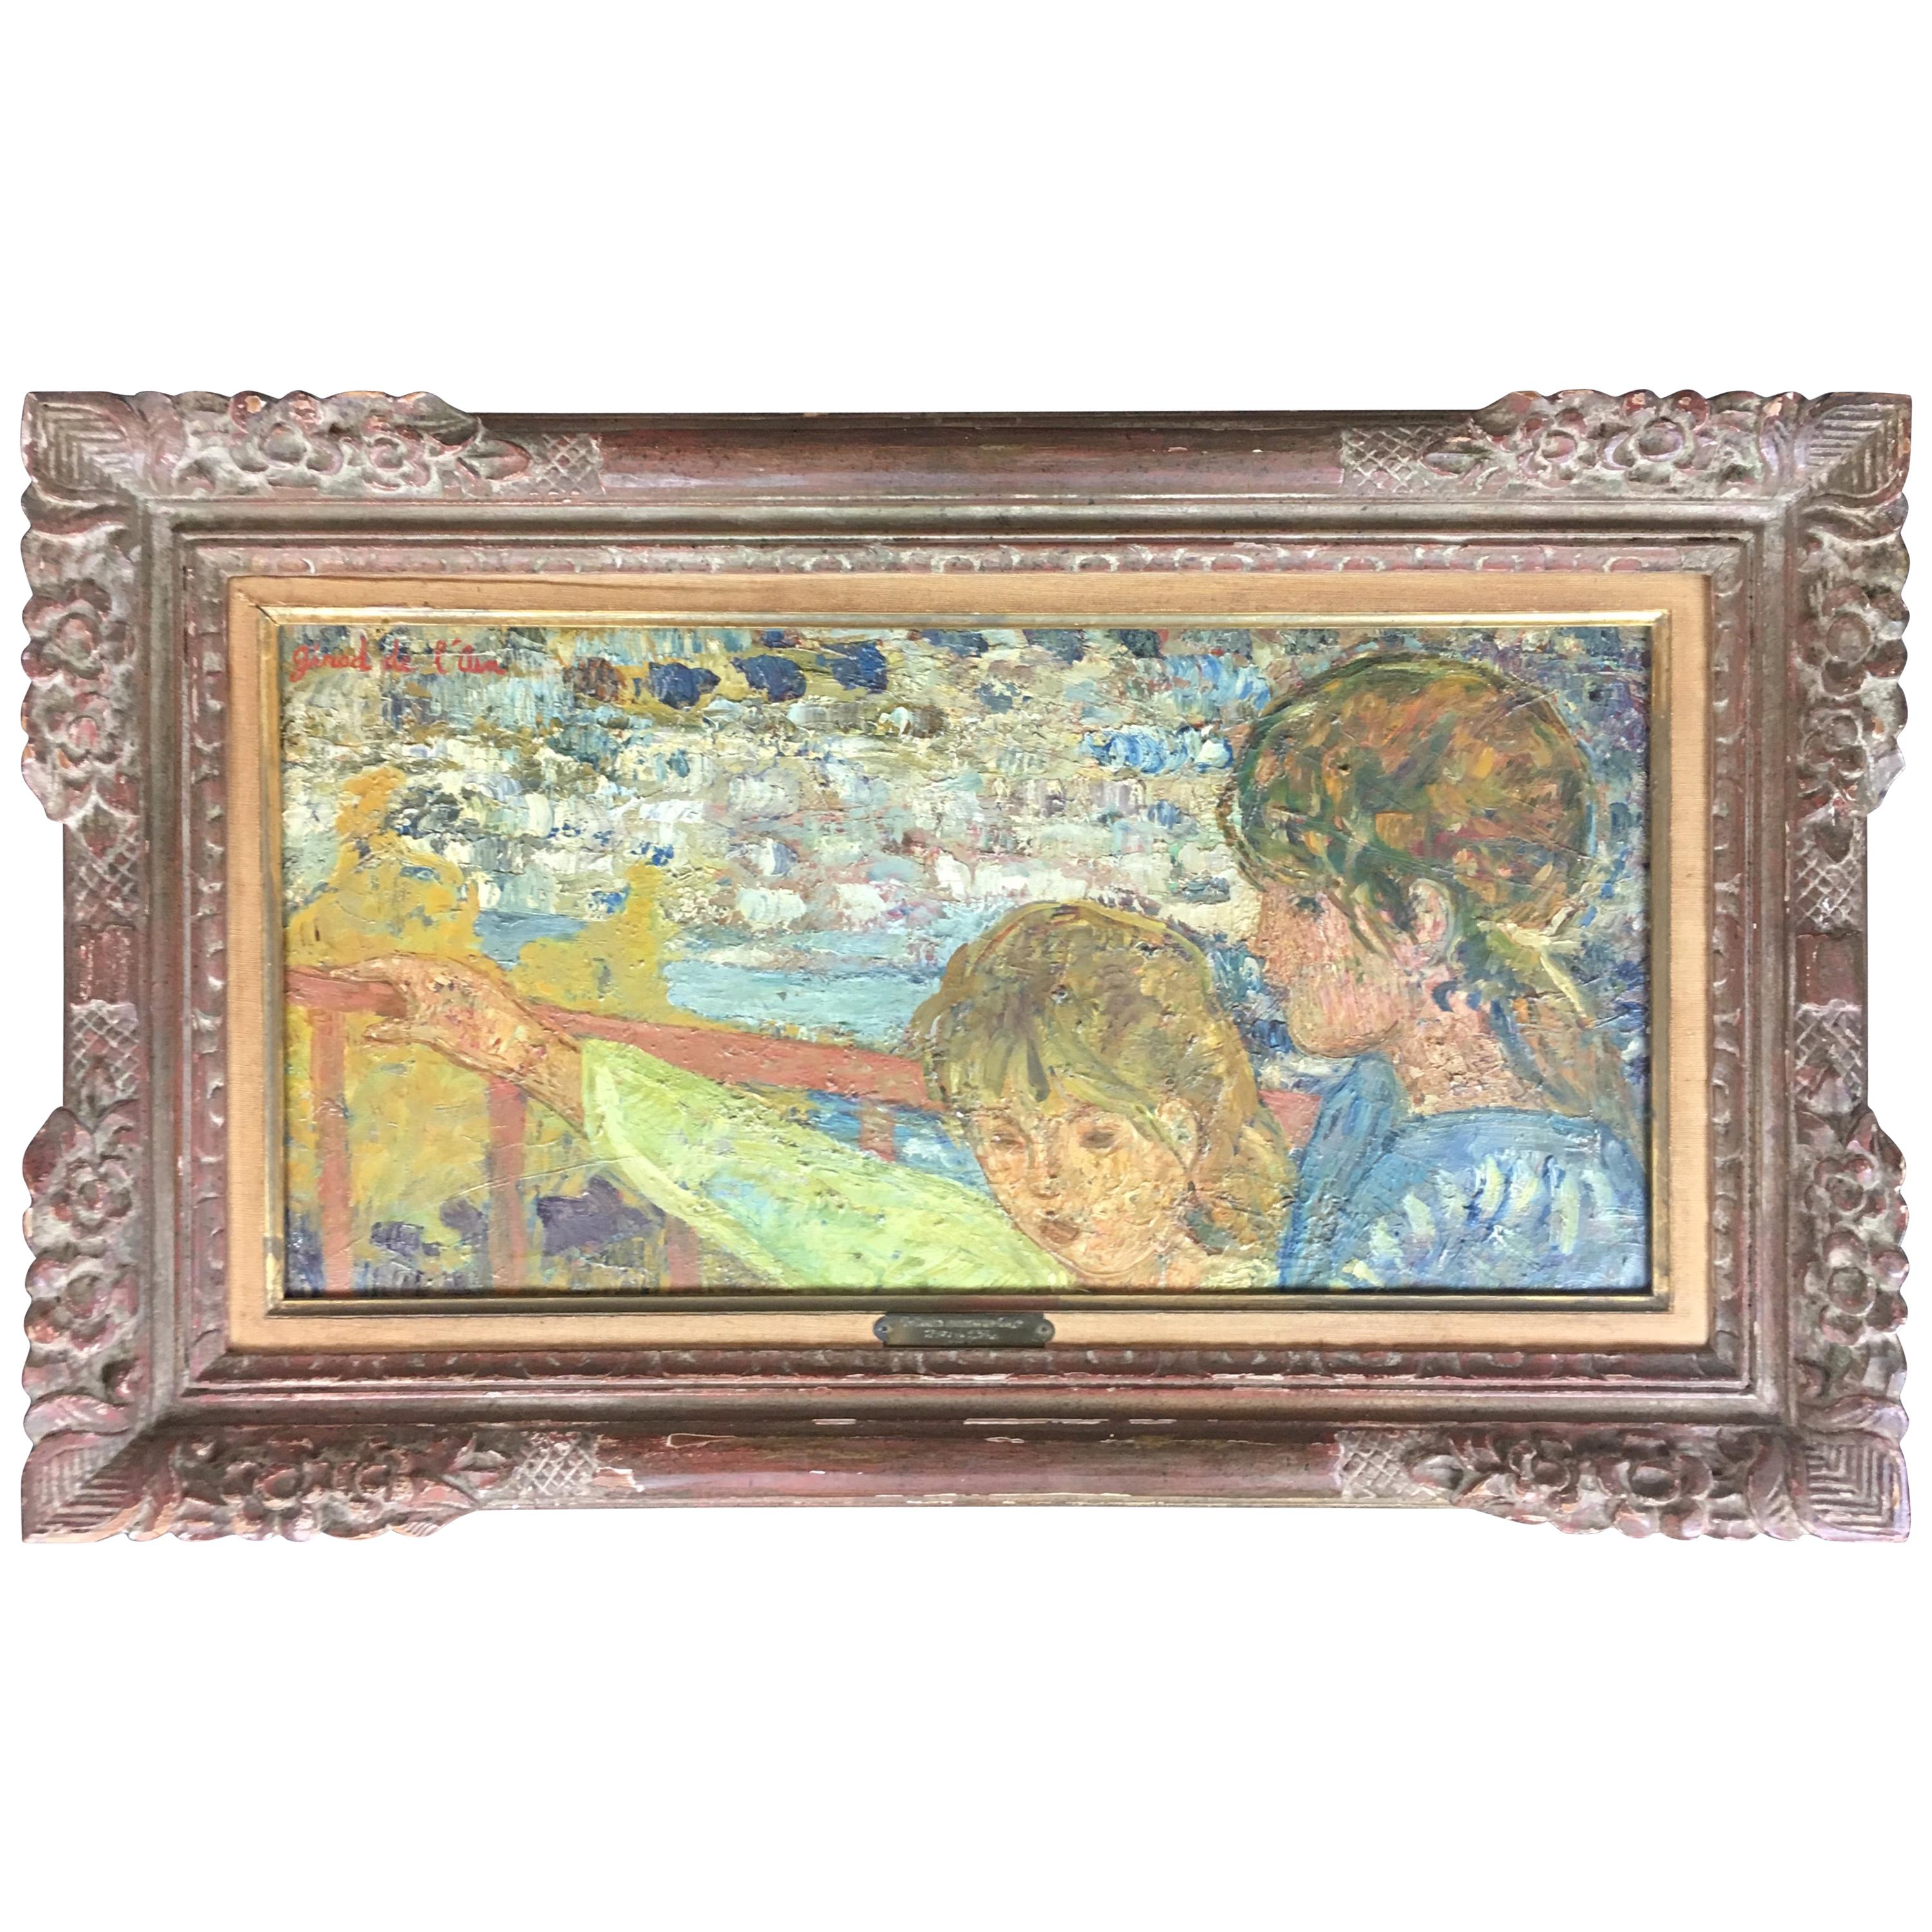 Helene Girod de L'Ain Oil Painting, Titled "Children in front of the Sea" For Sale